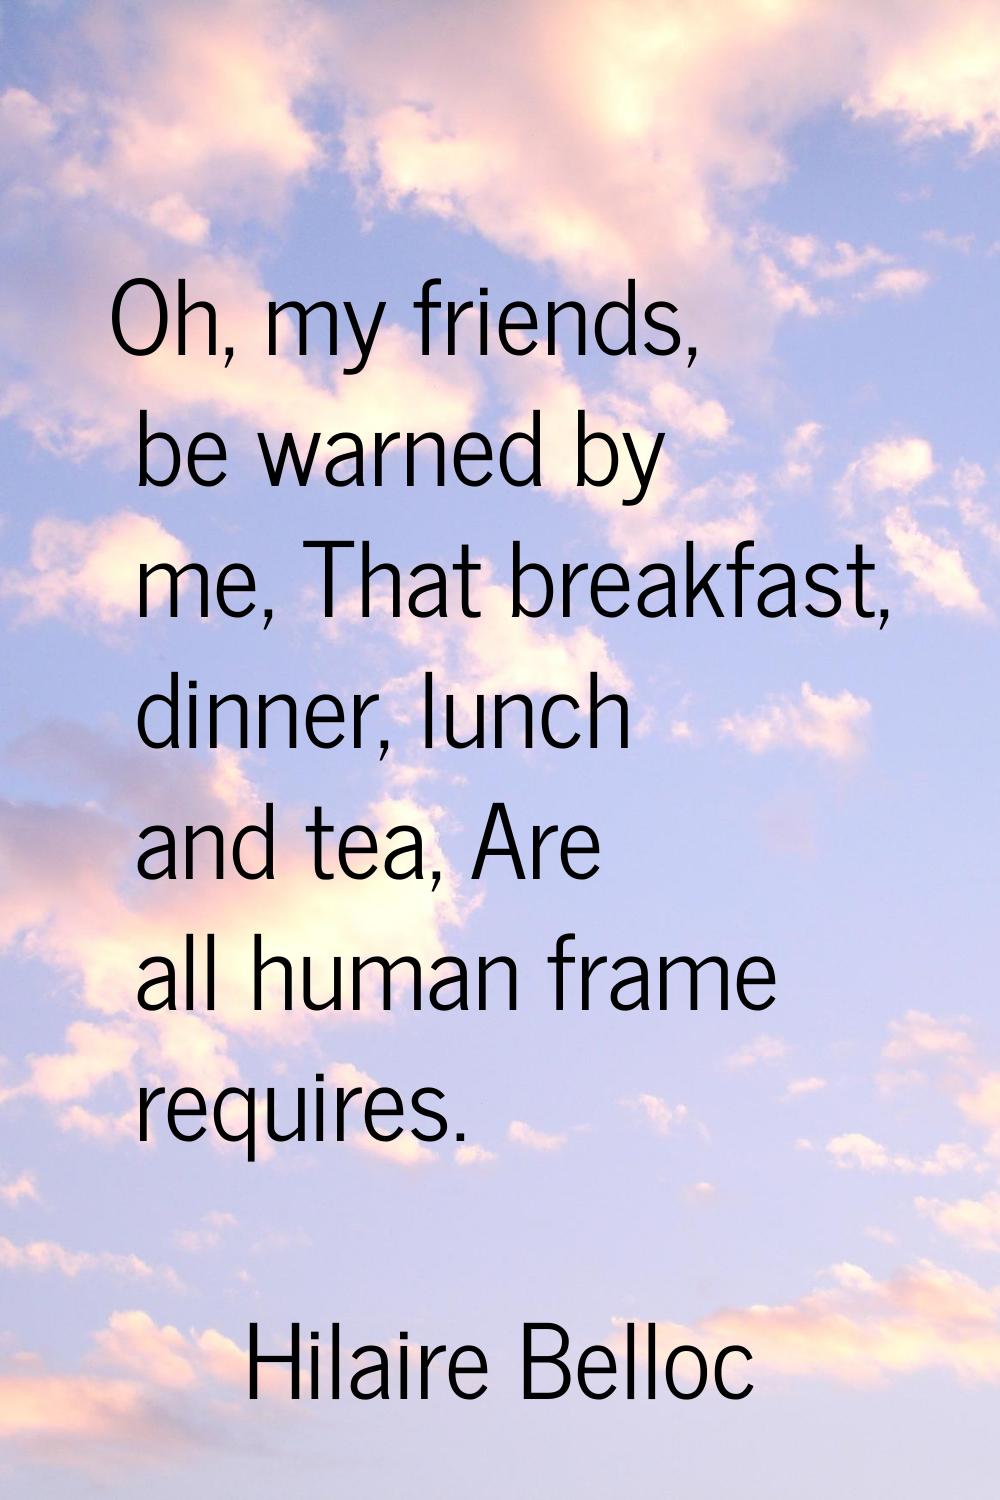 Oh, my friends, be warned by me, That breakfast, dinner, lunch and tea, Are all human frame require